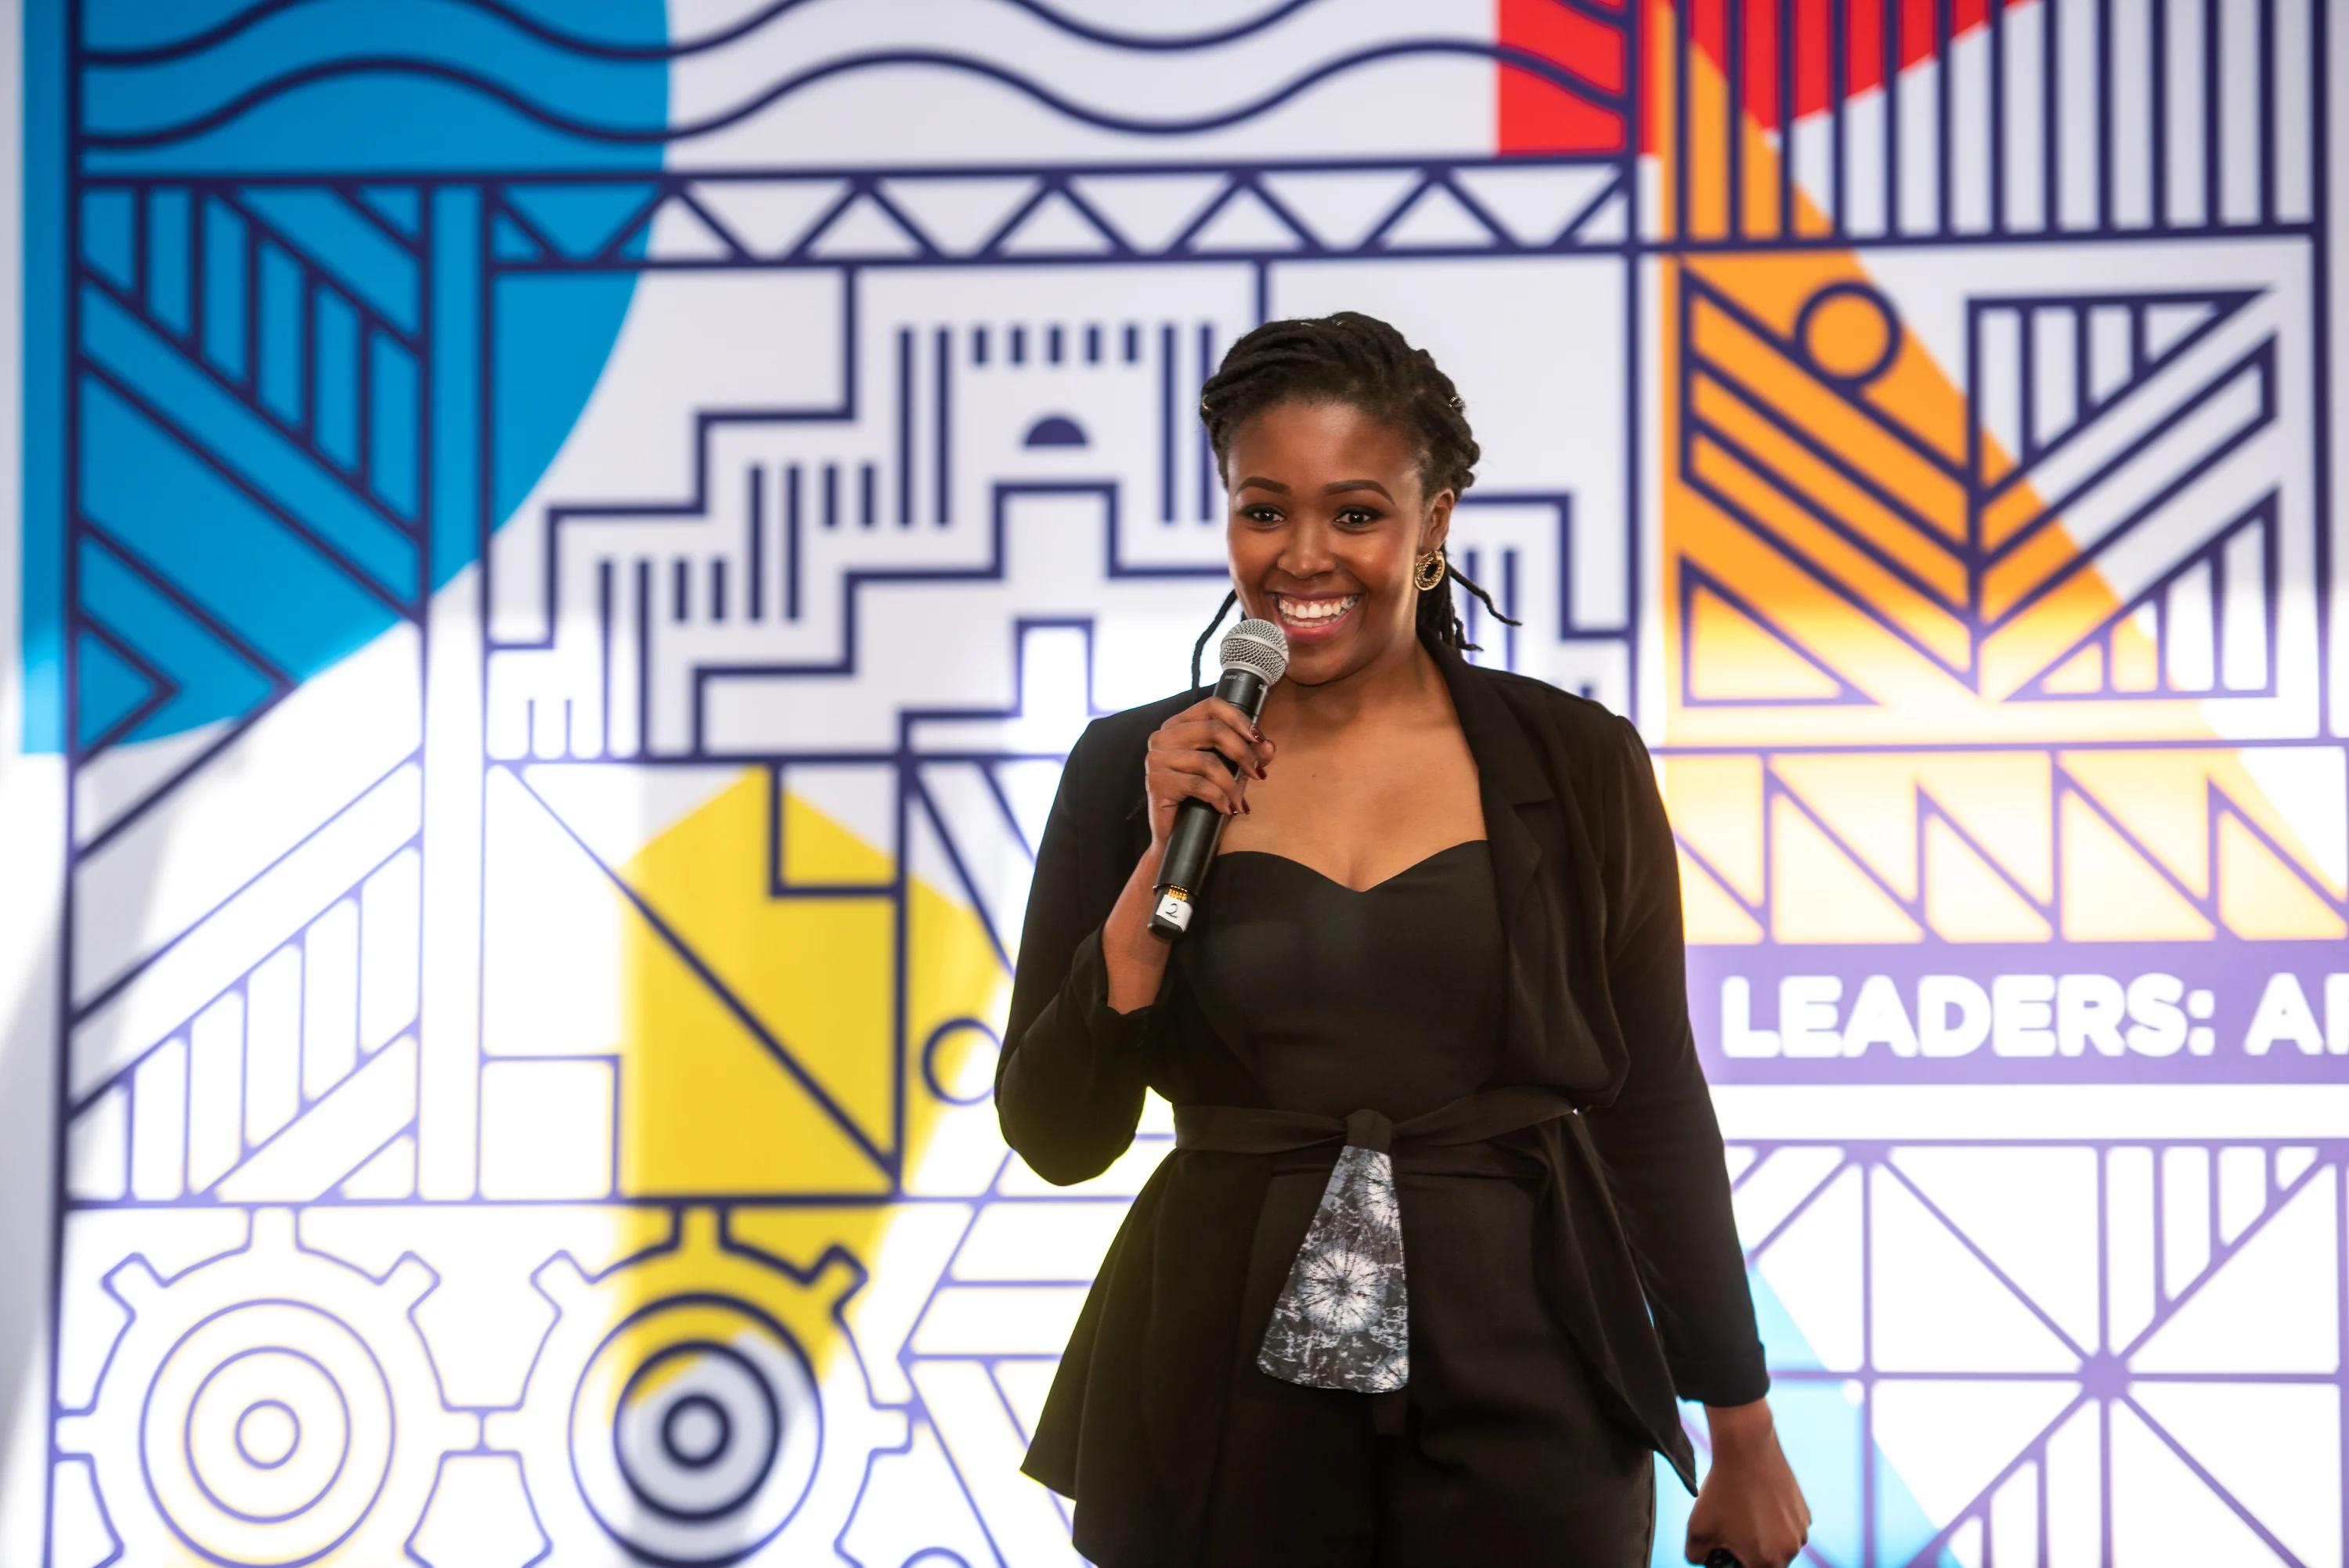 A woman with a deep skin tone holds a microphone and speaks to an unseen audience. She is smiling and has short black locs. In the background, a patterned sign reads, "Leader: Africa."